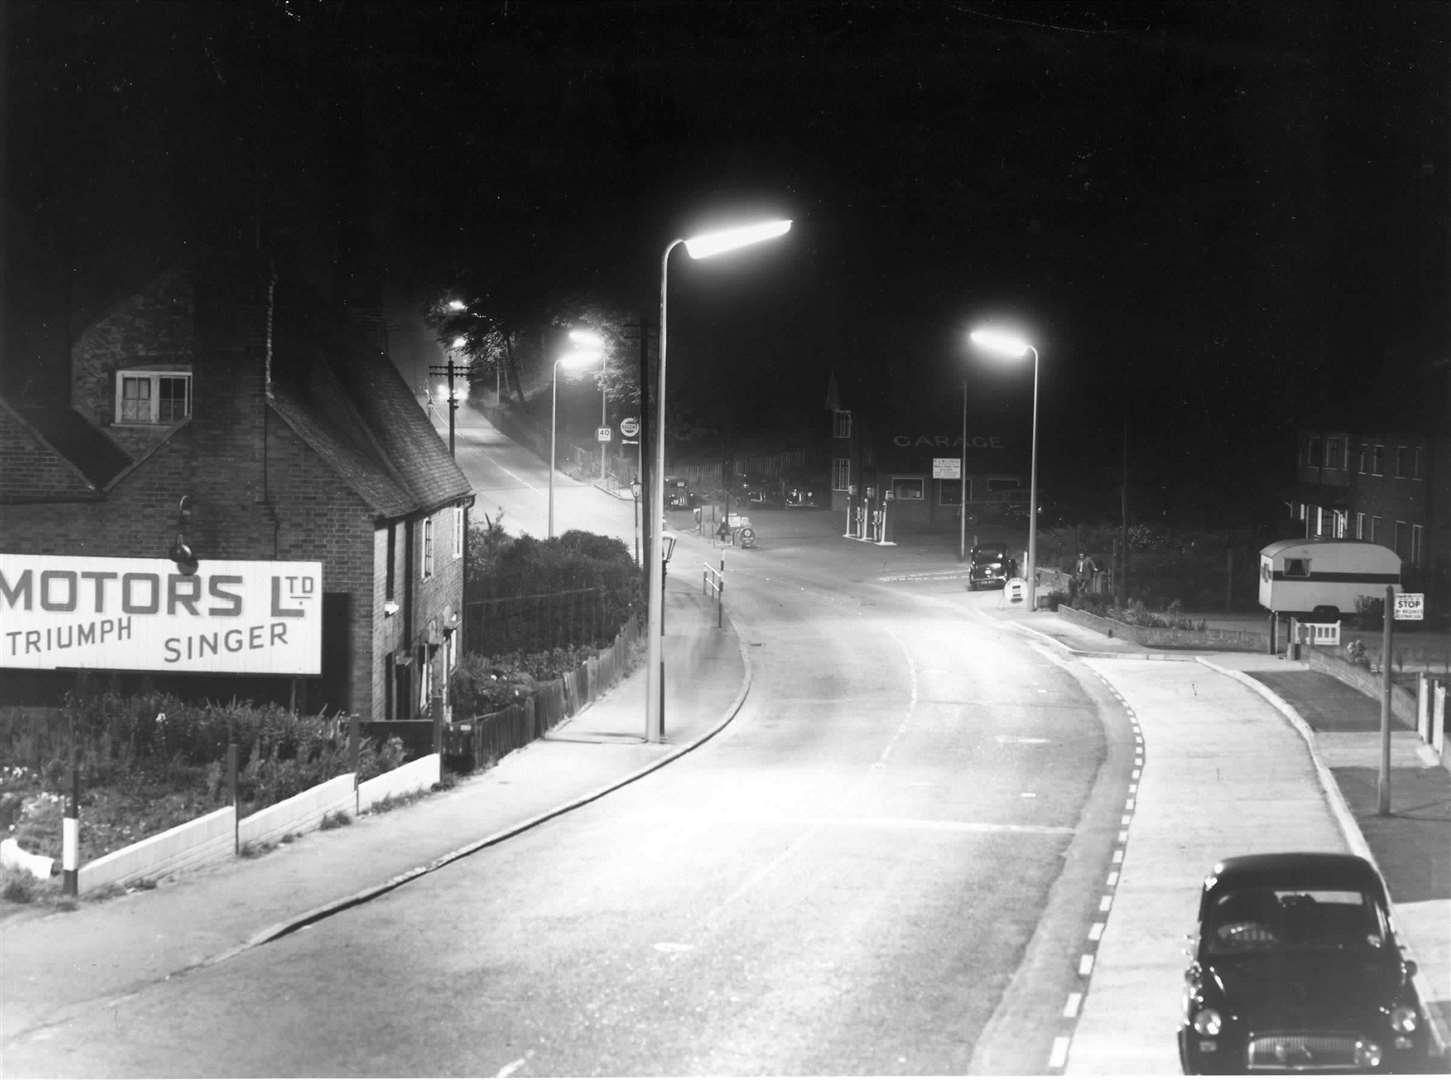 A view of the new GEC flourescent street lighting installation in Seal Road, Sevenoaks, in July 1959. Picture: The General Electric Co Ltd